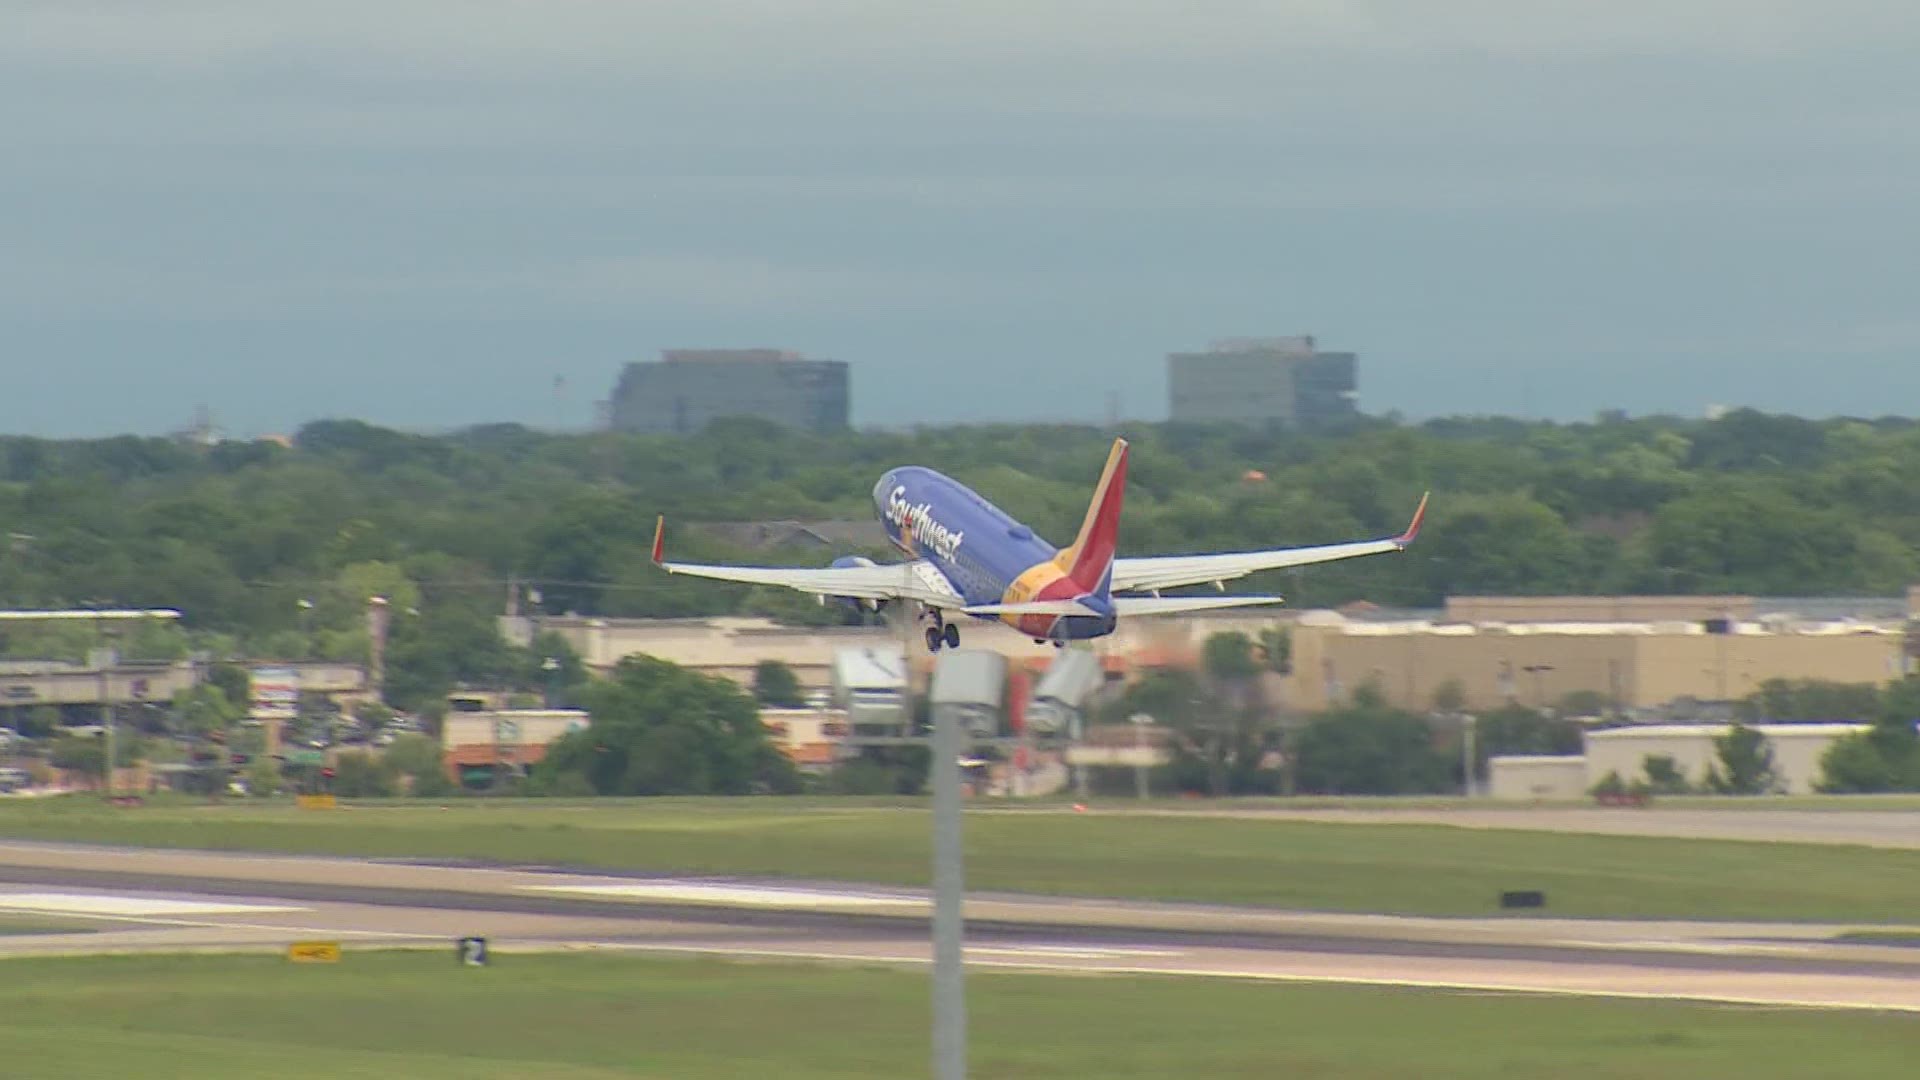 Per the Transportation Security Administration, 7.1 million passengers took to the skies during Memorial Day Weekend, up almost 450% compared to last year.